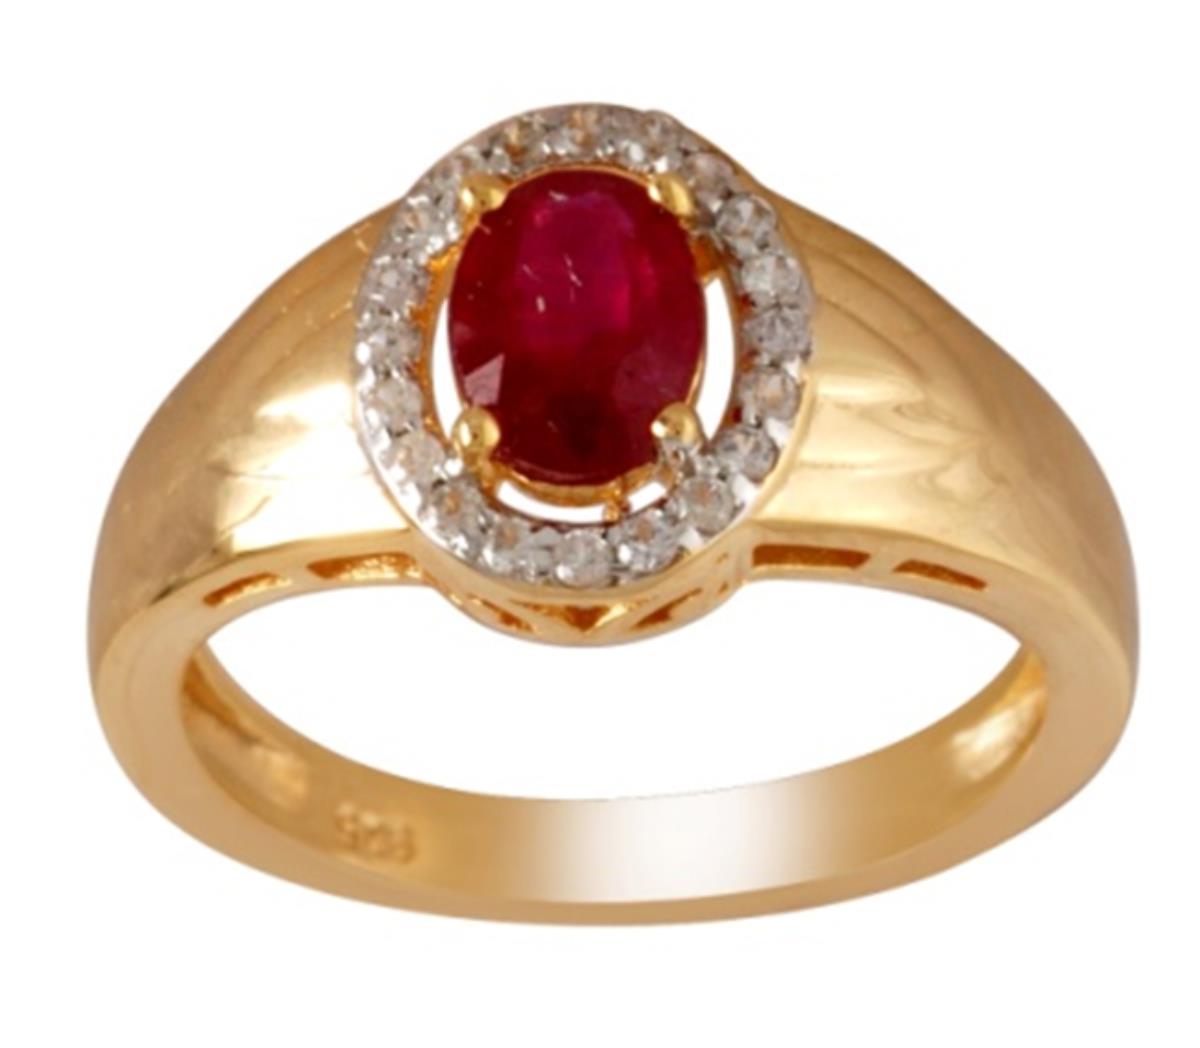 10K Yellow Gold 7x5mm Glass Filled Ruby Oval Cut & White Zircon Halo Fashion Ring